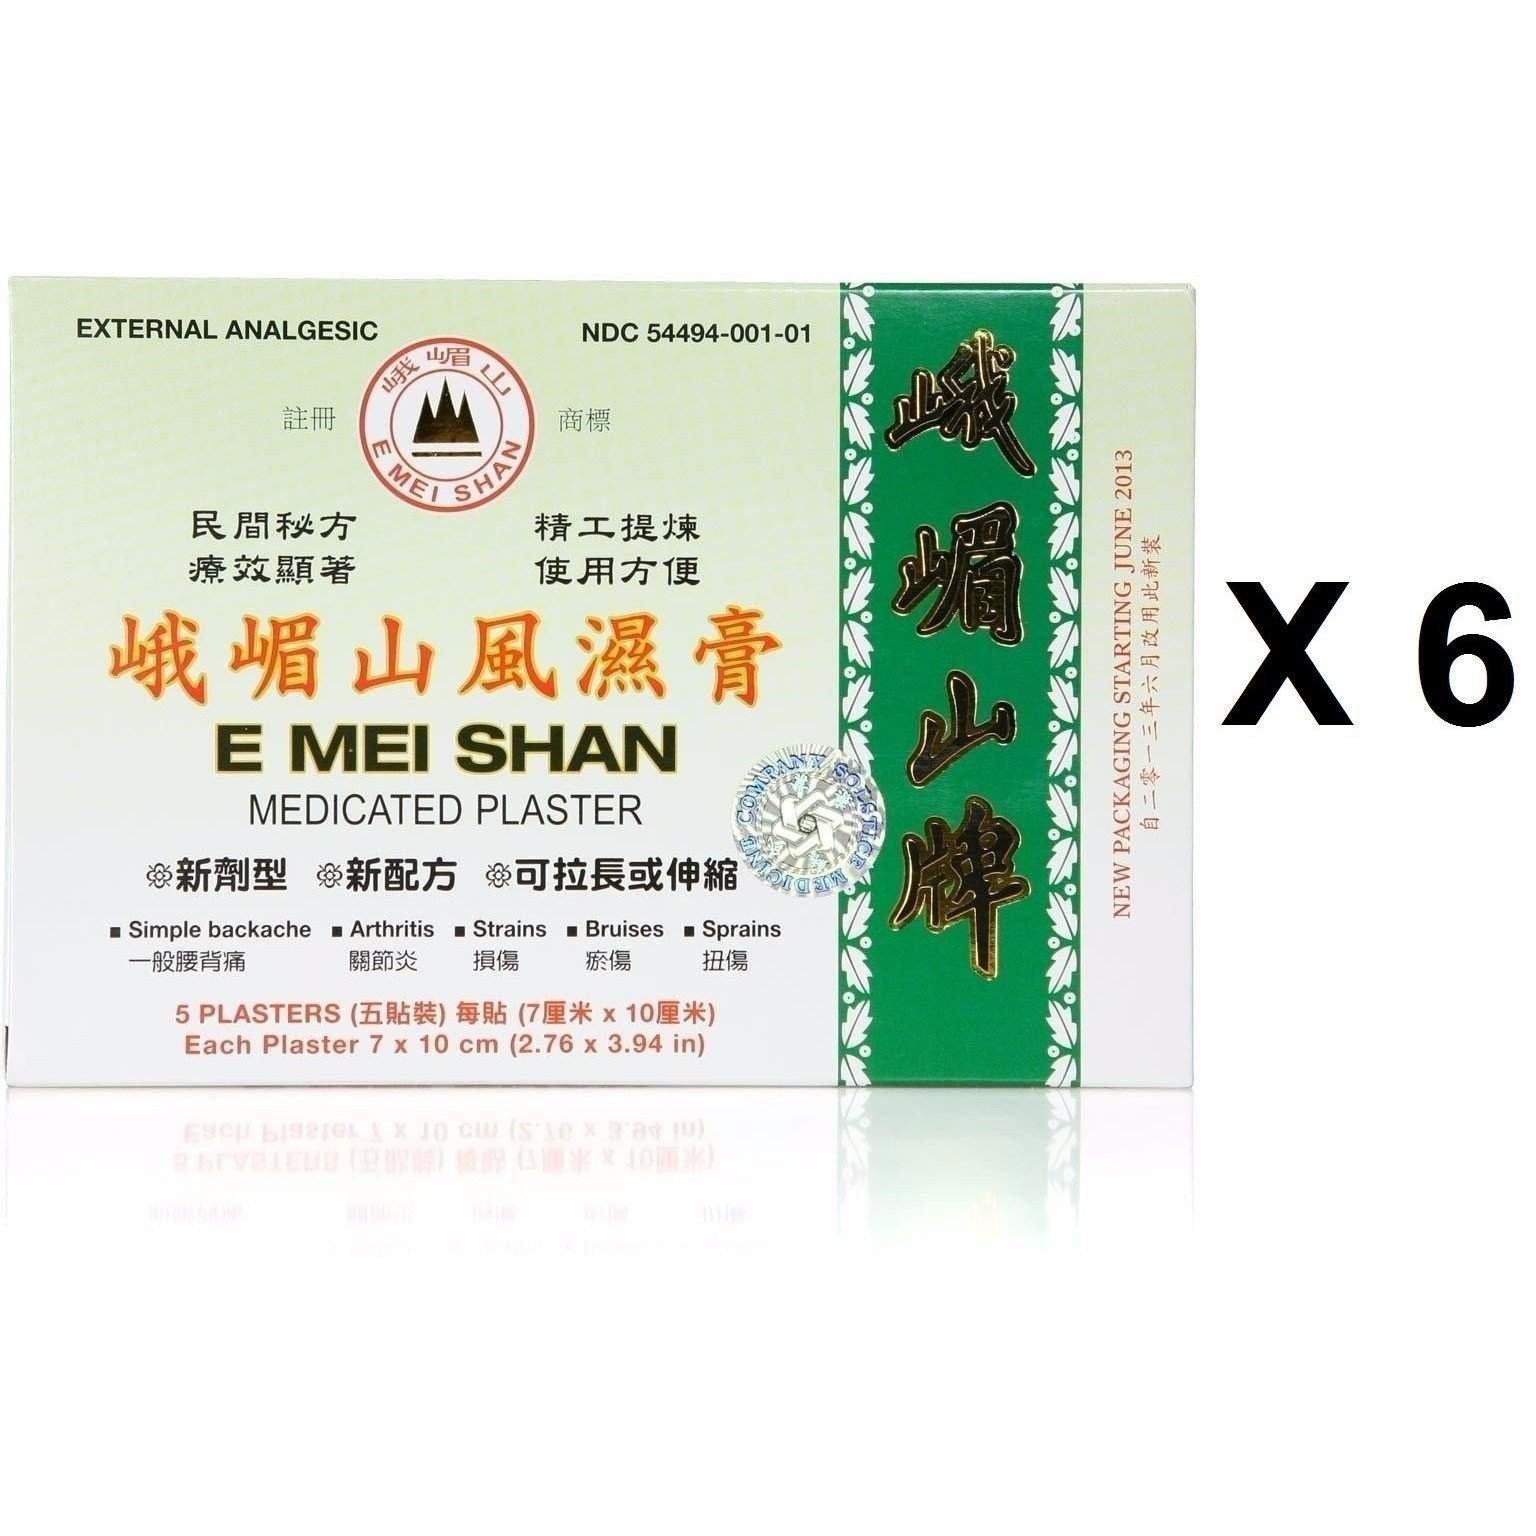 6 Boxes E Mei Shan Medicated Plaster (5 plasters, 3.94 in x 2.76 in) - Buy at New Green Nutrition